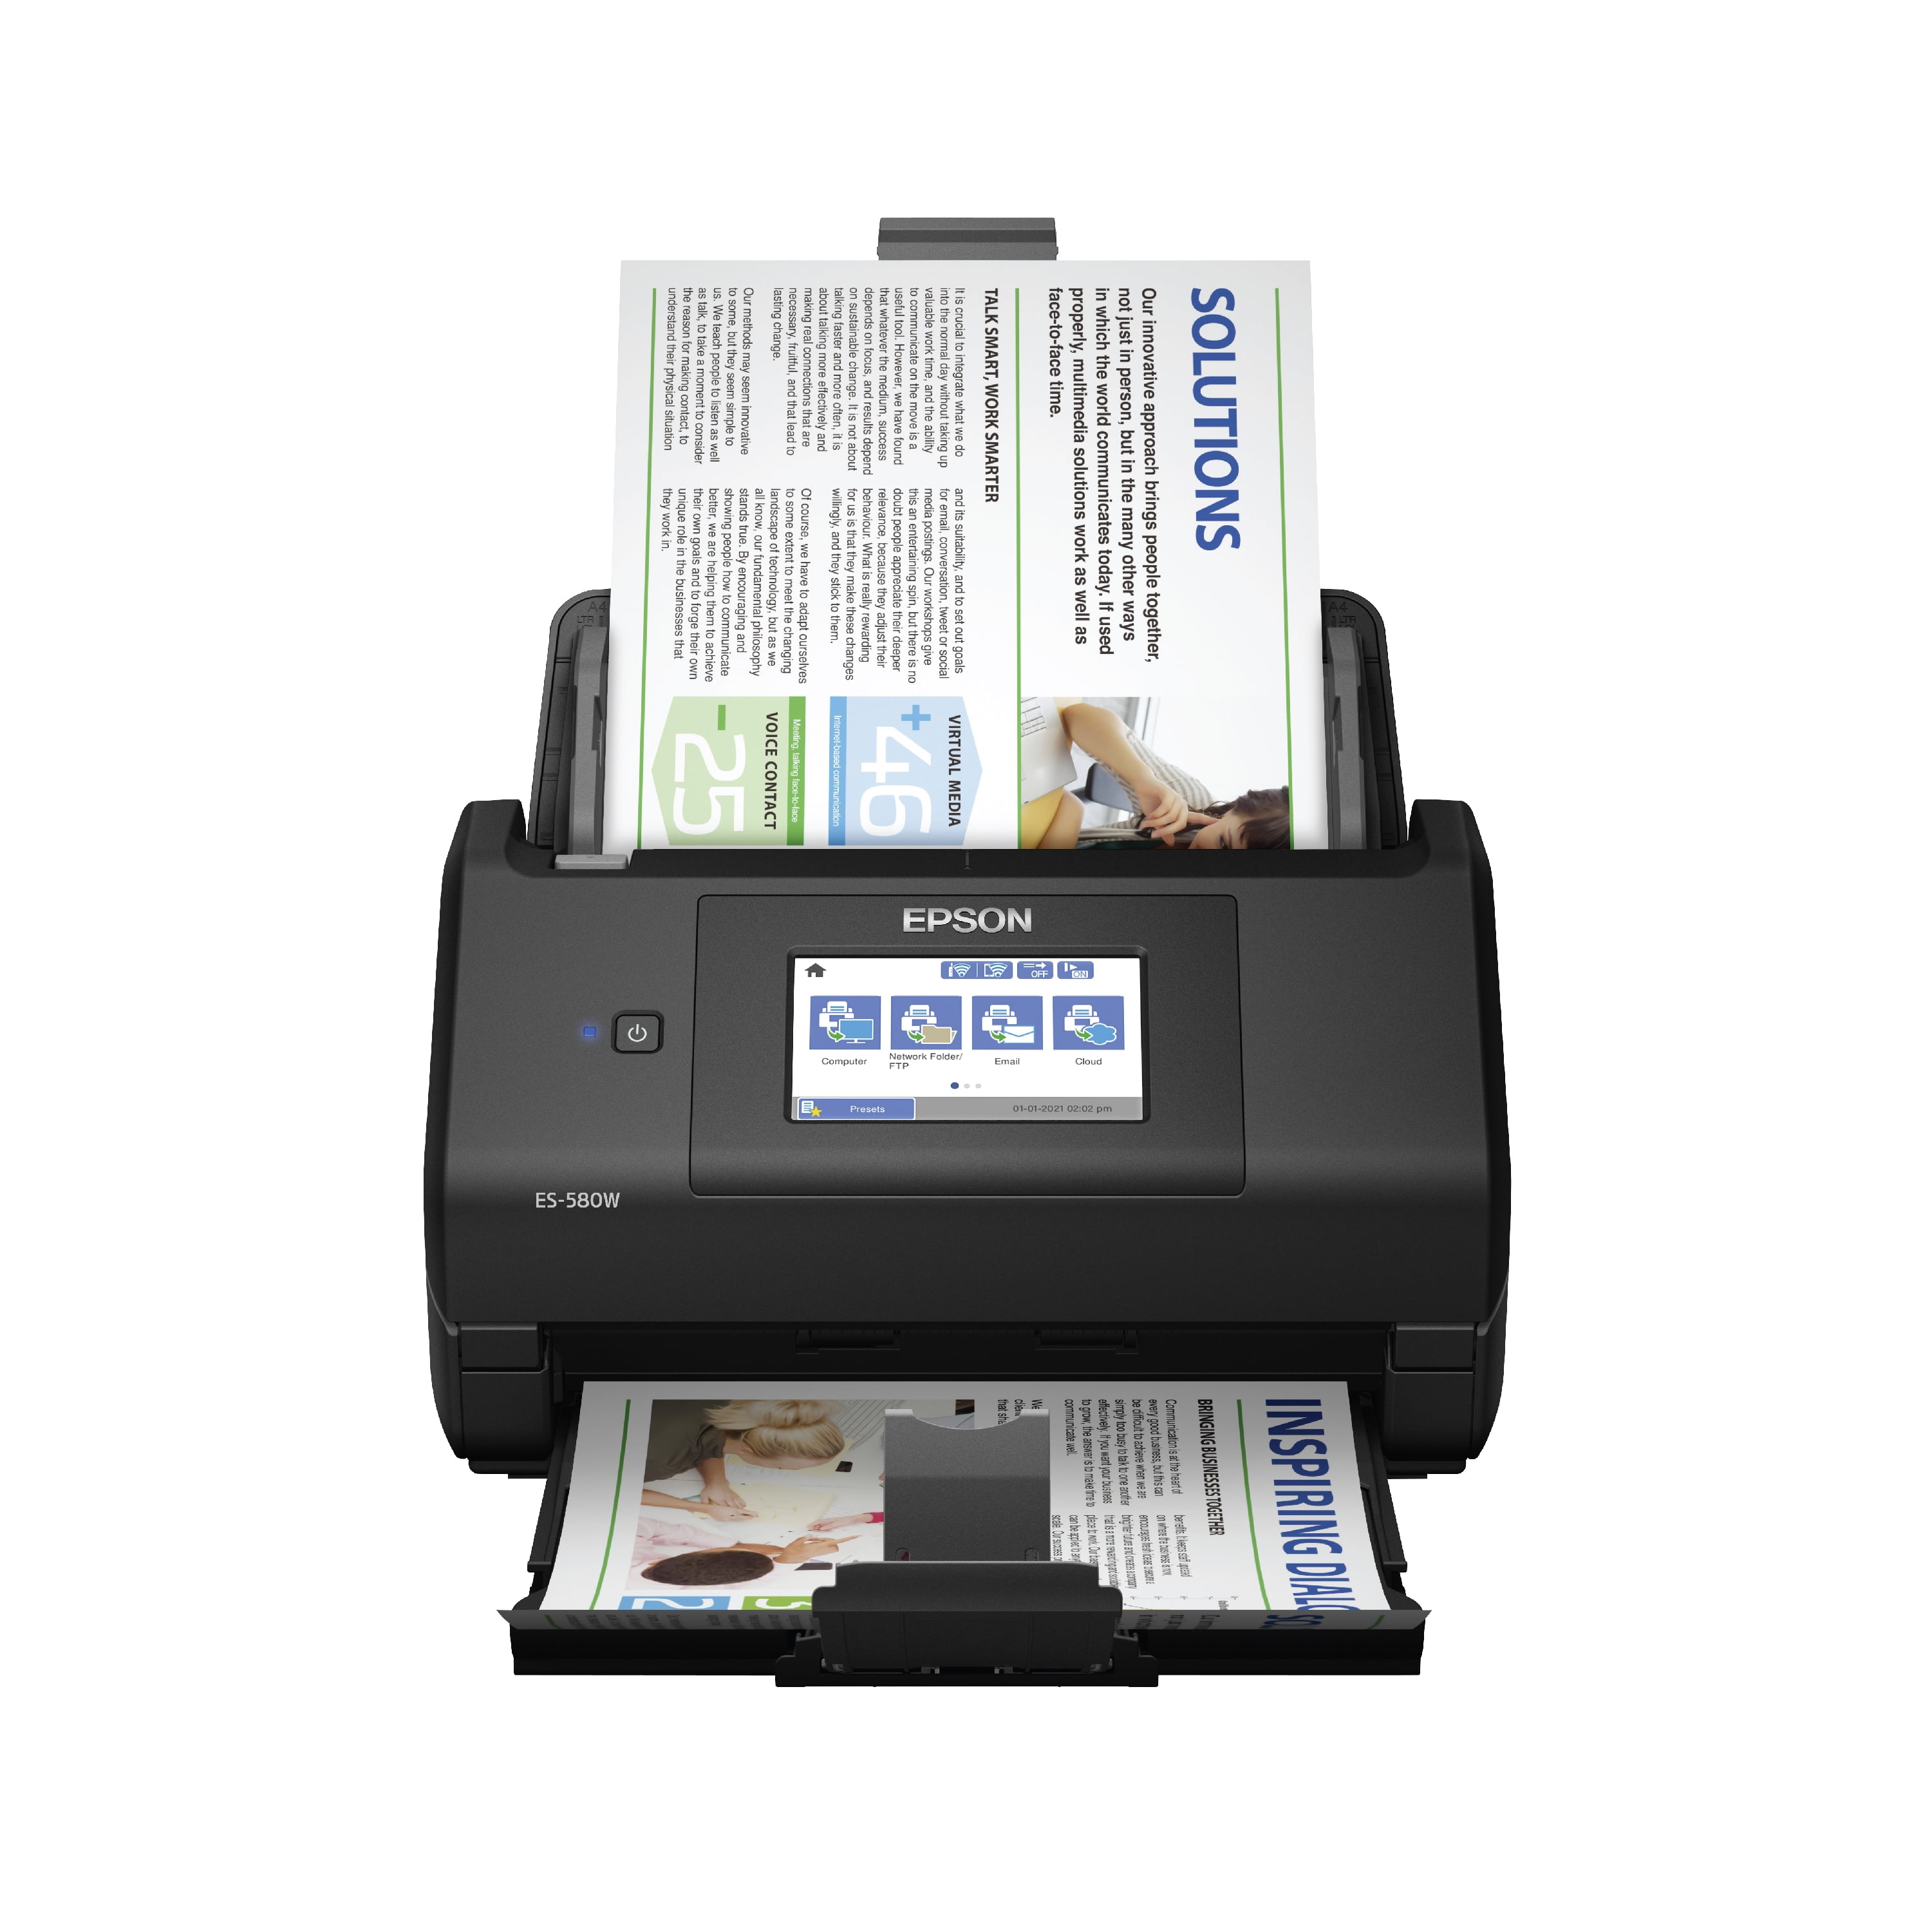 Epson ES-580W Wireless Color Duplex Desktop Document Scanner for PC and Mac with 100-sheet Auto Document Feeder (ADF) Intuitive 4.3" Touchscreen -